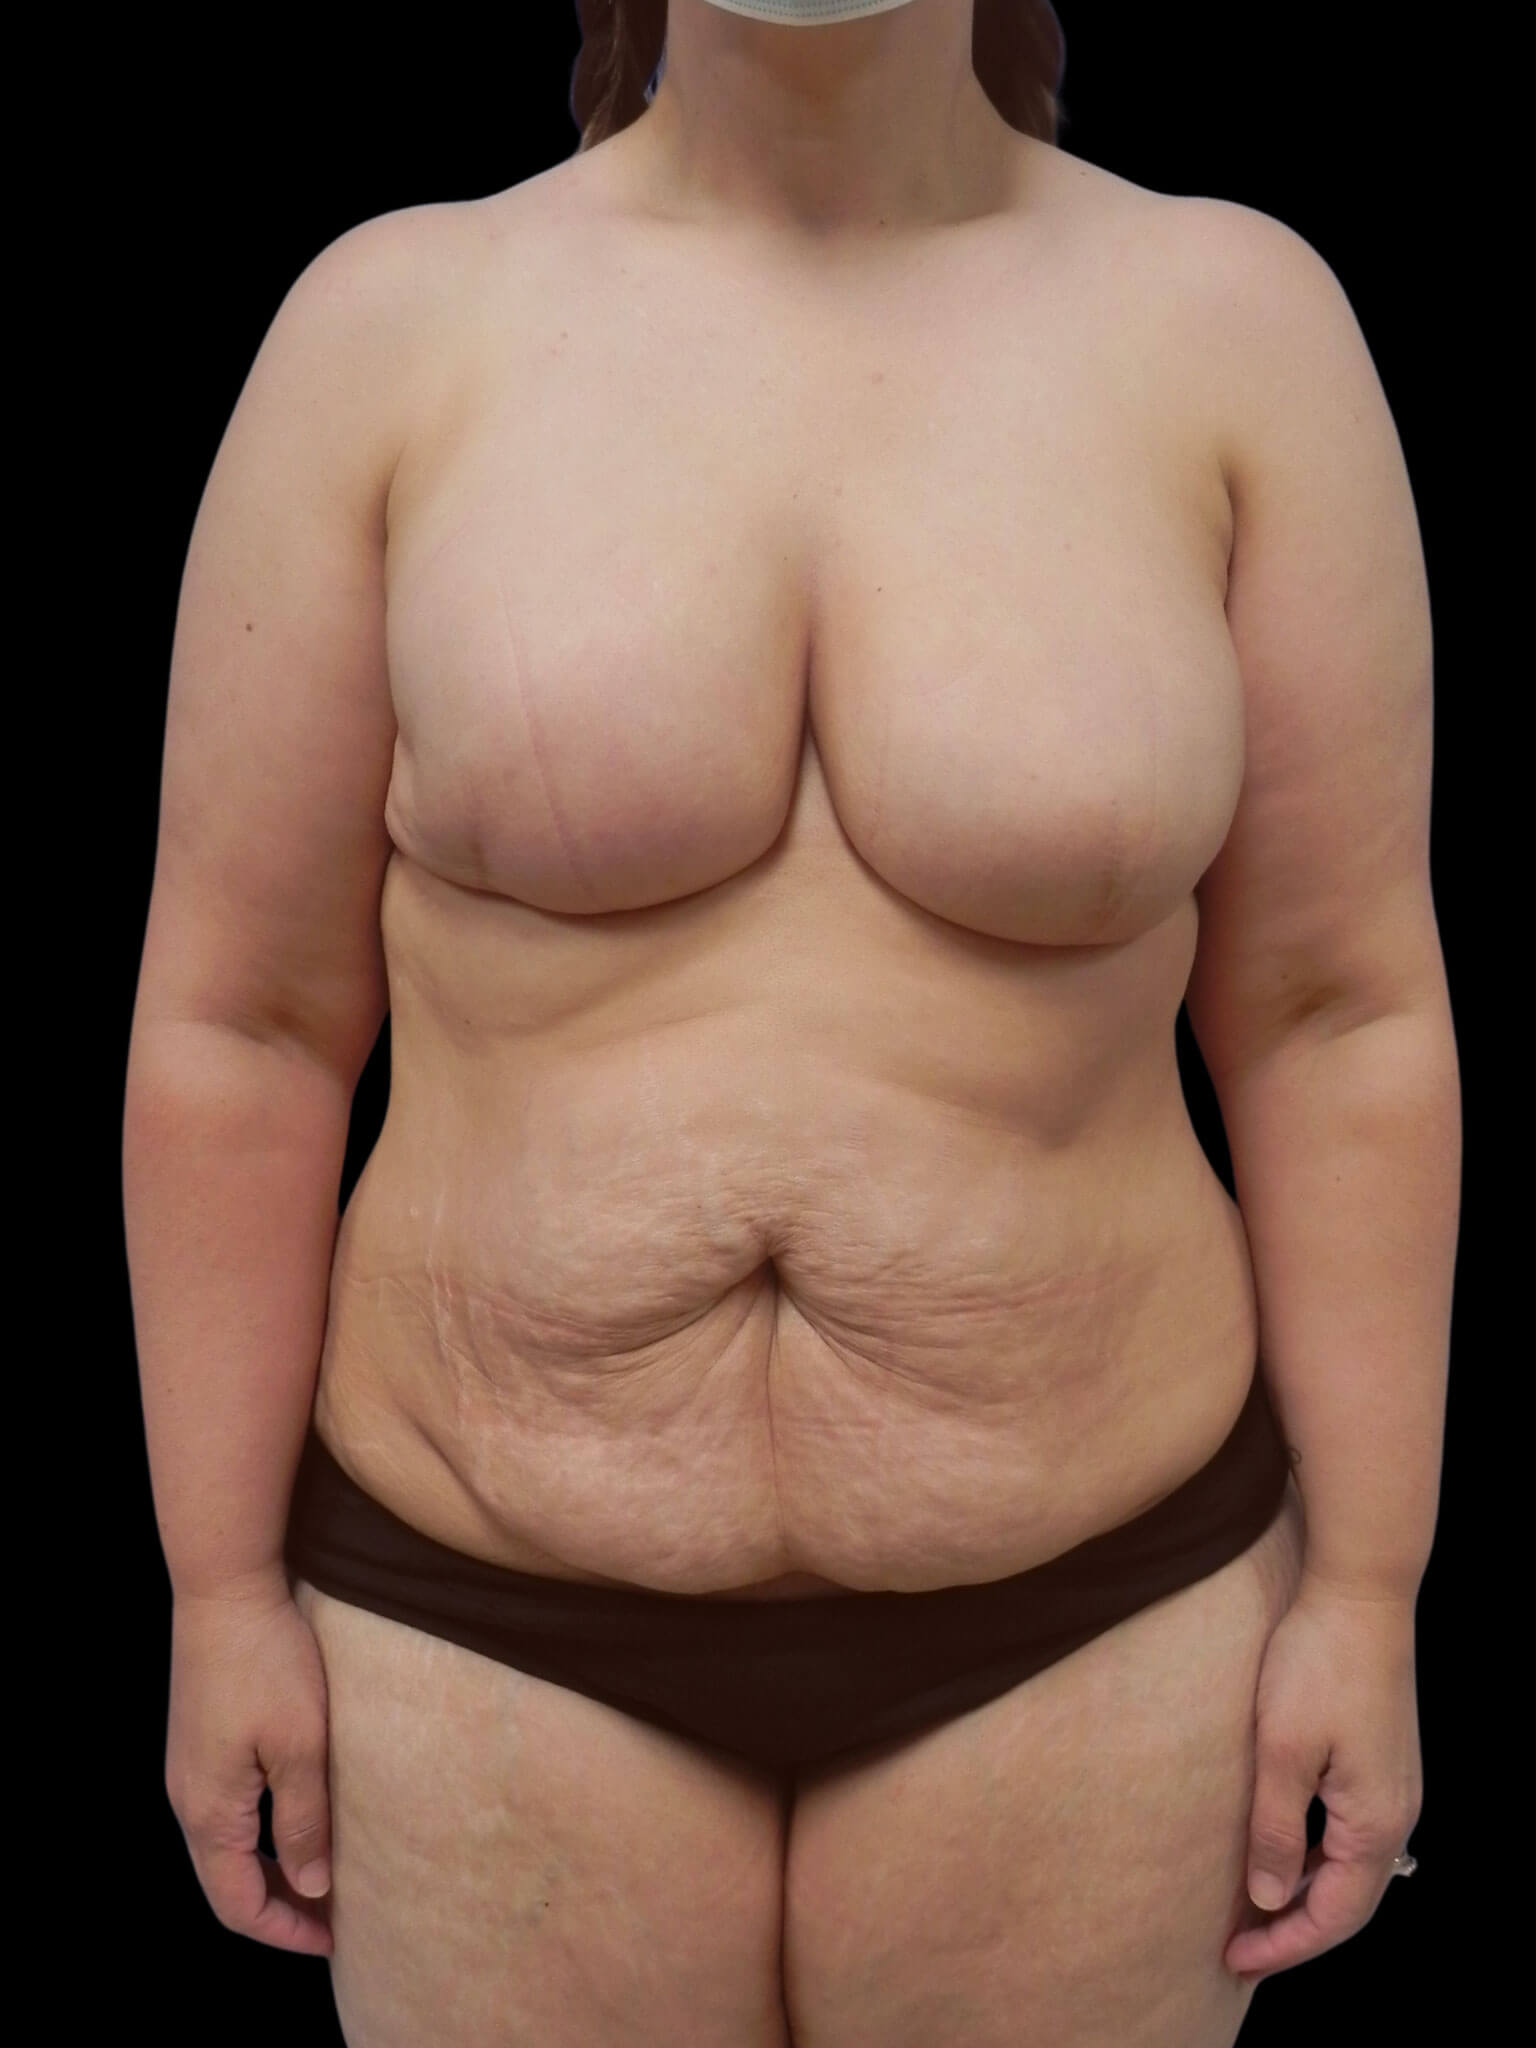 Stage 1: Bilateral Mastectomy with Immediate High Definition DIEP Flap Breast Reconstruction.Stage 2: Bilateral Breast Revision with Liposuction.